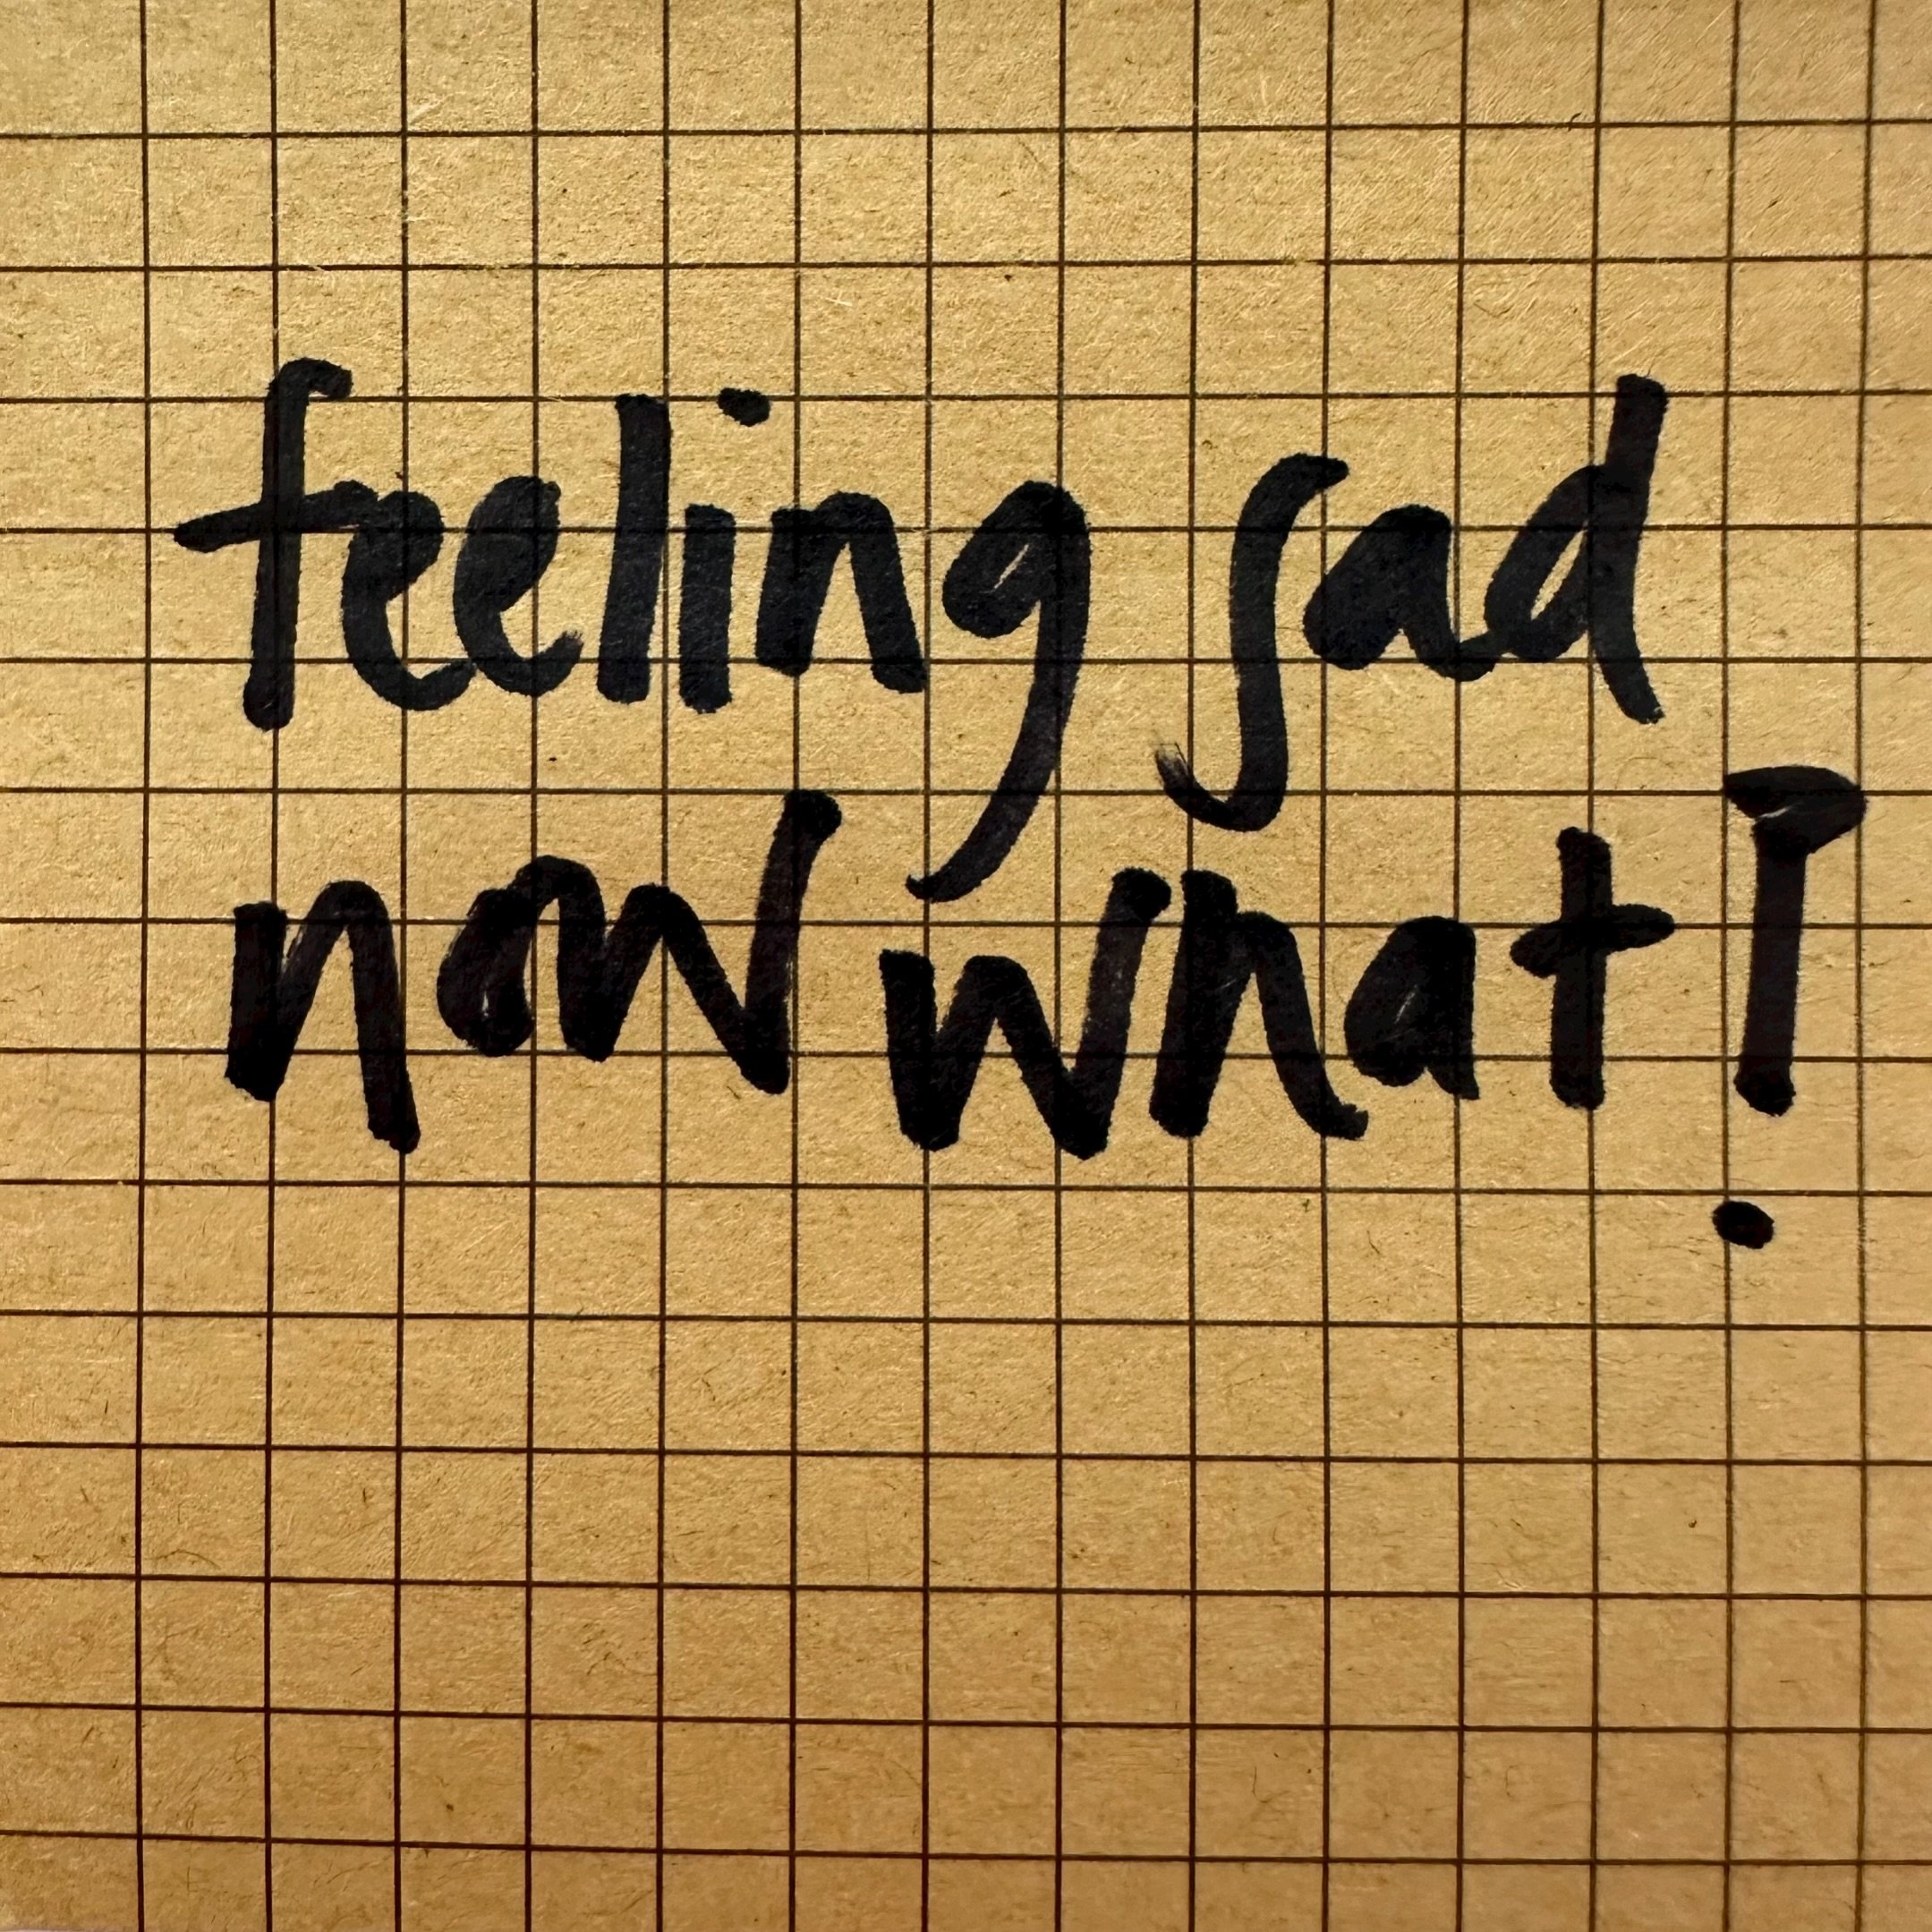 ✨feeling sad, now what?

it&rsquo;s OK to feel sad. it&rsquo;s a natural emotion that we all experience from time to time.

BUT what do you do when you find yourself in the depths of sadness that keeps you held back?

here&rsquo;s a gentle reminder ?